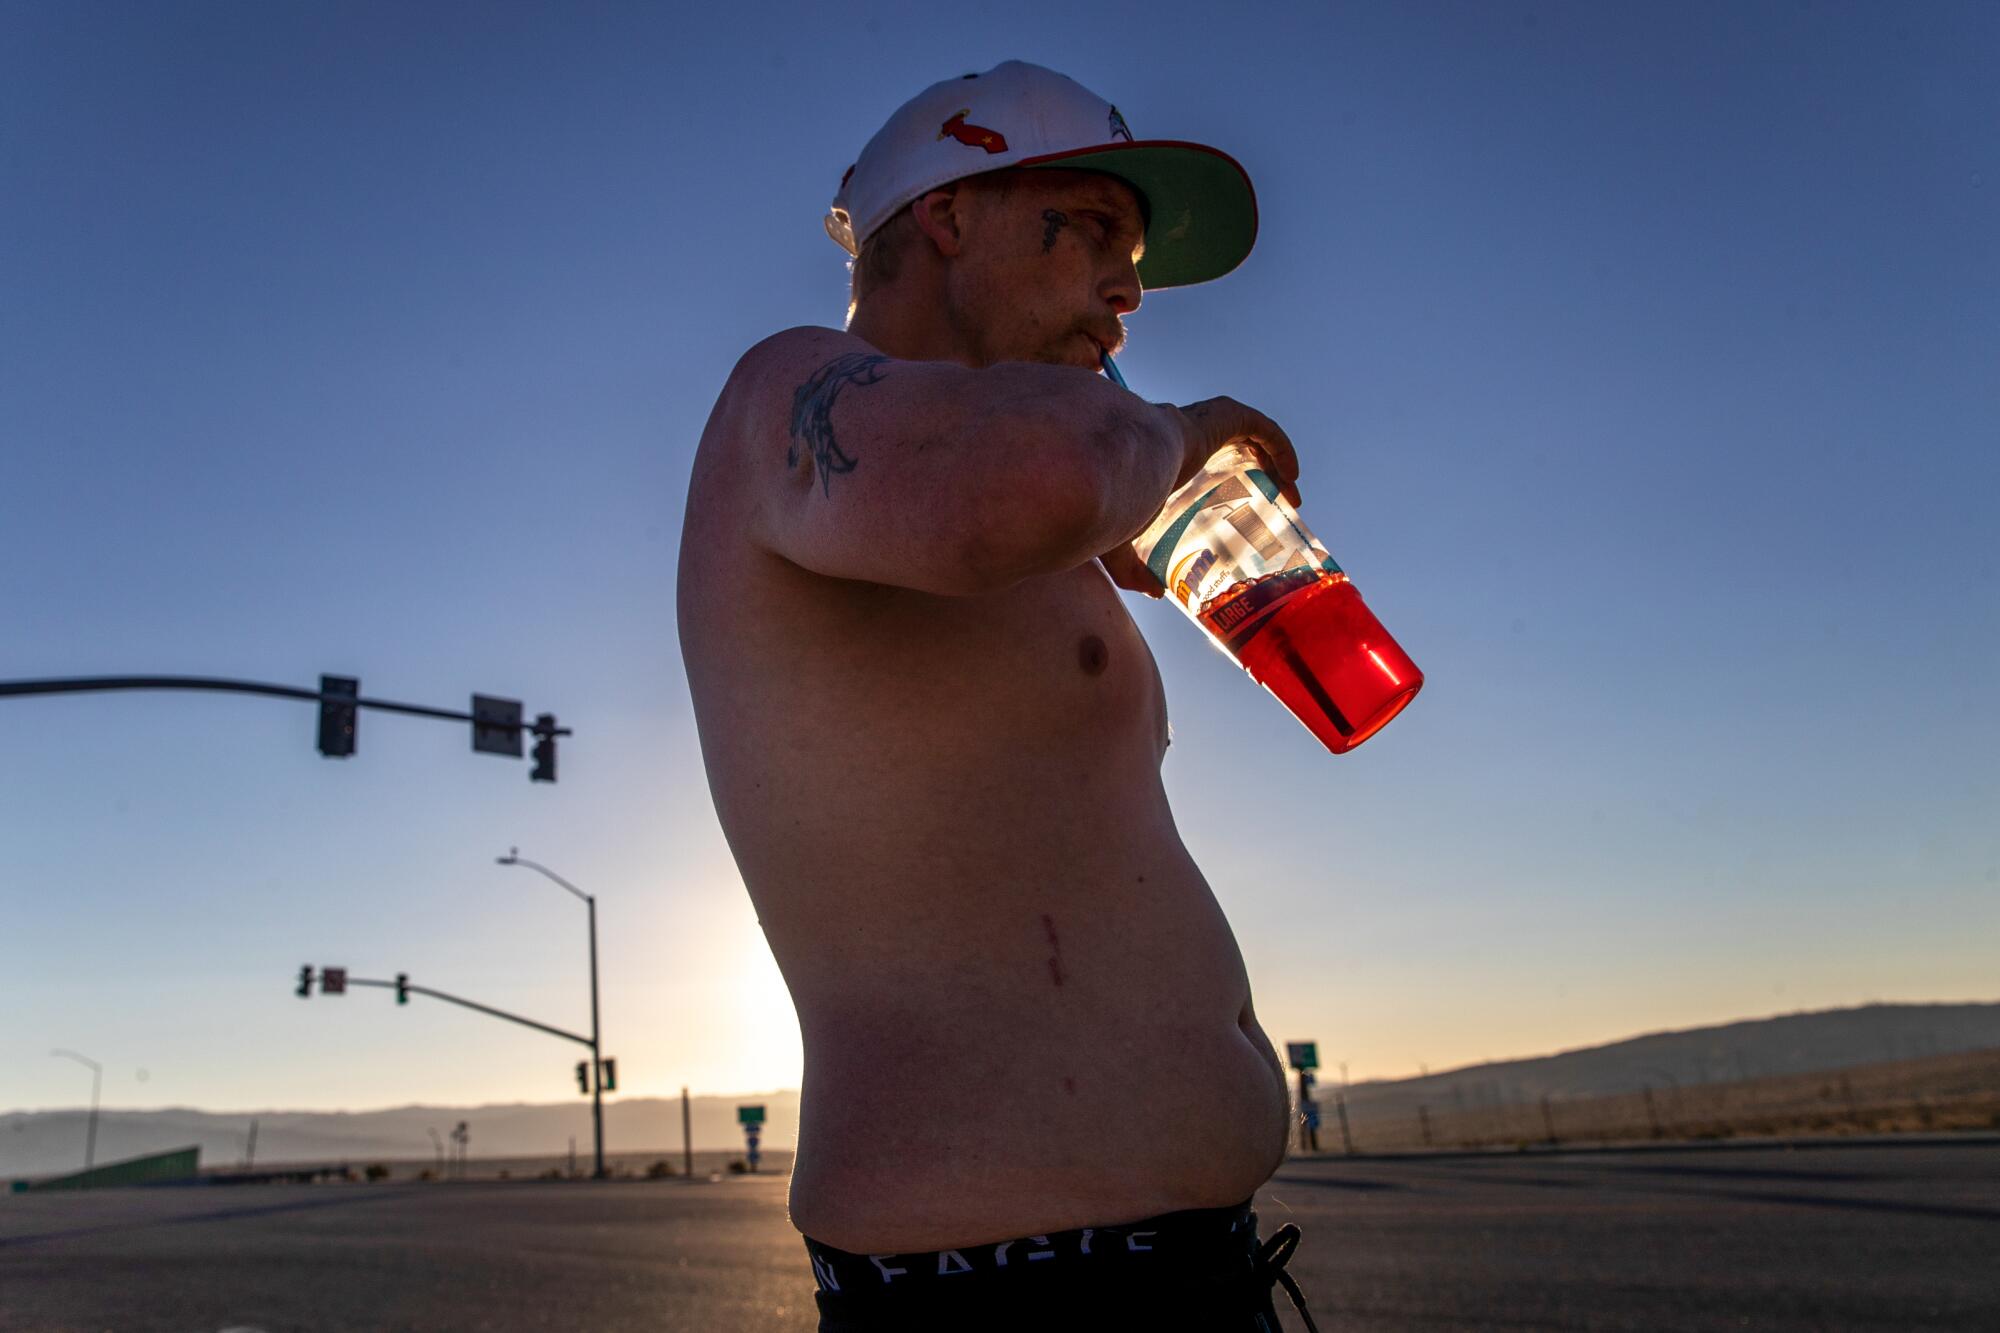 A shirtless man drinks from a plastic cup with a straw.